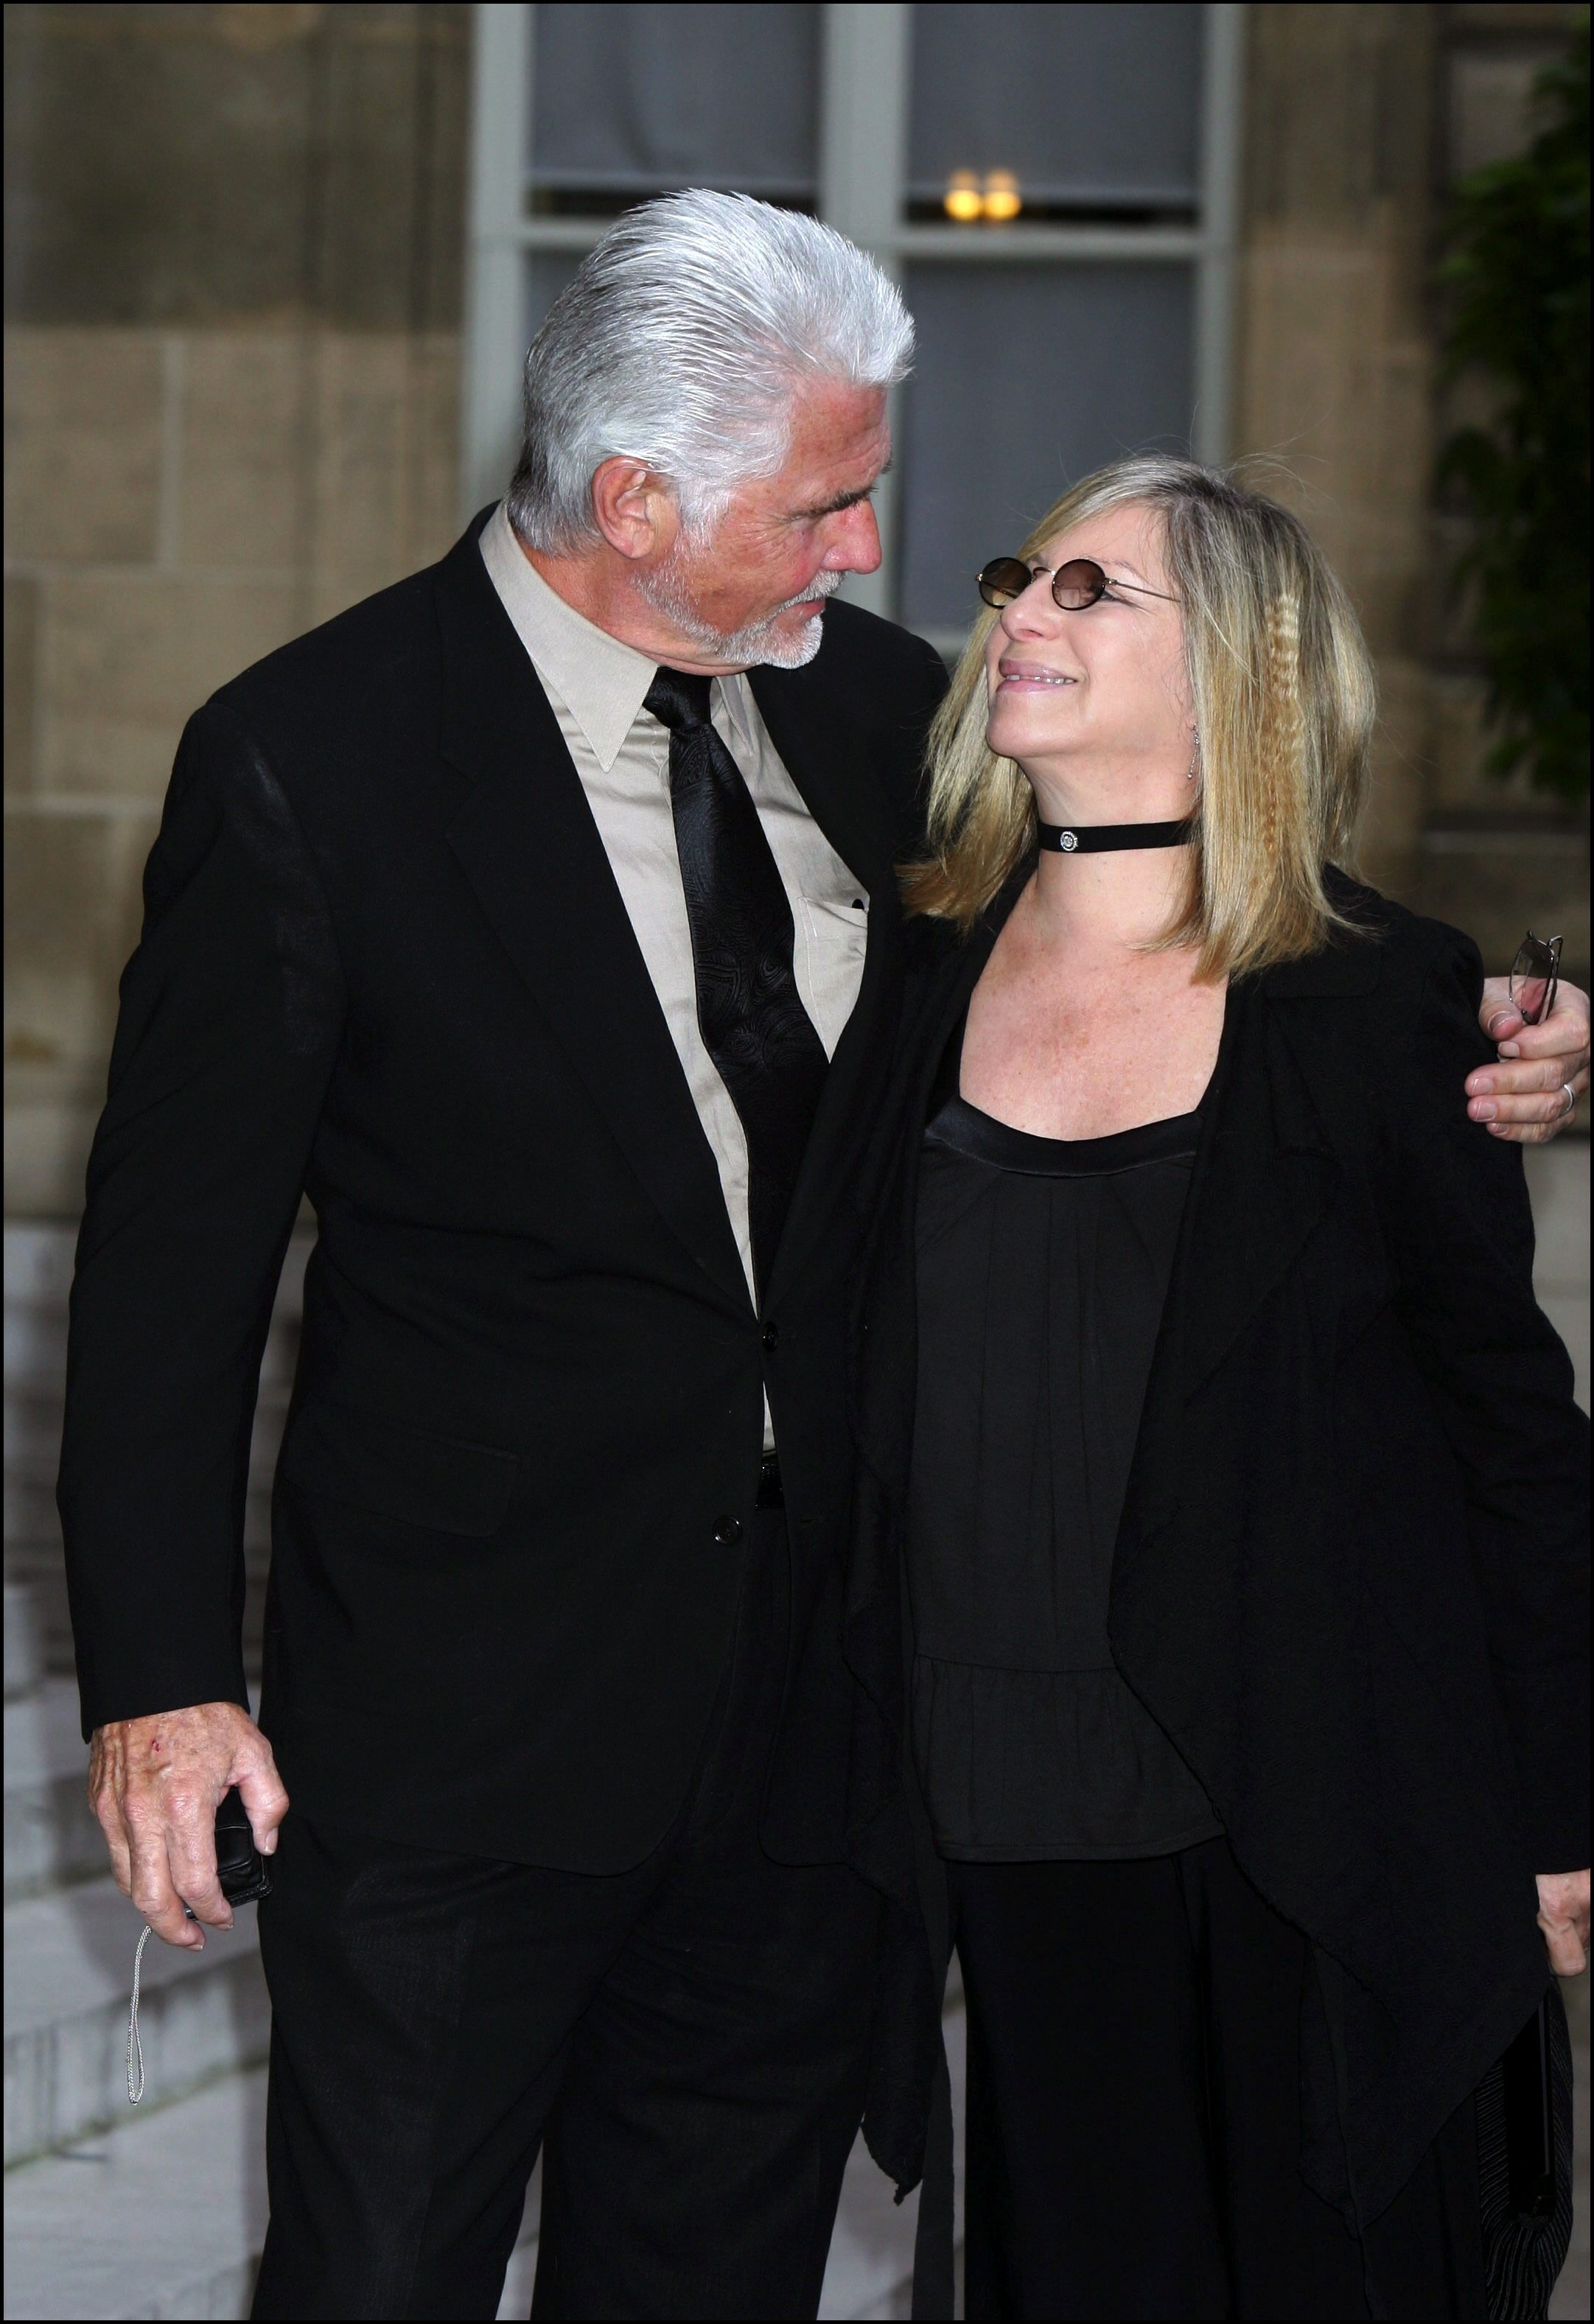 James Brolin and Barbra Streisand at The Elysee Palace on June 28, 2007 in Paris, France. | Source: Getty Images